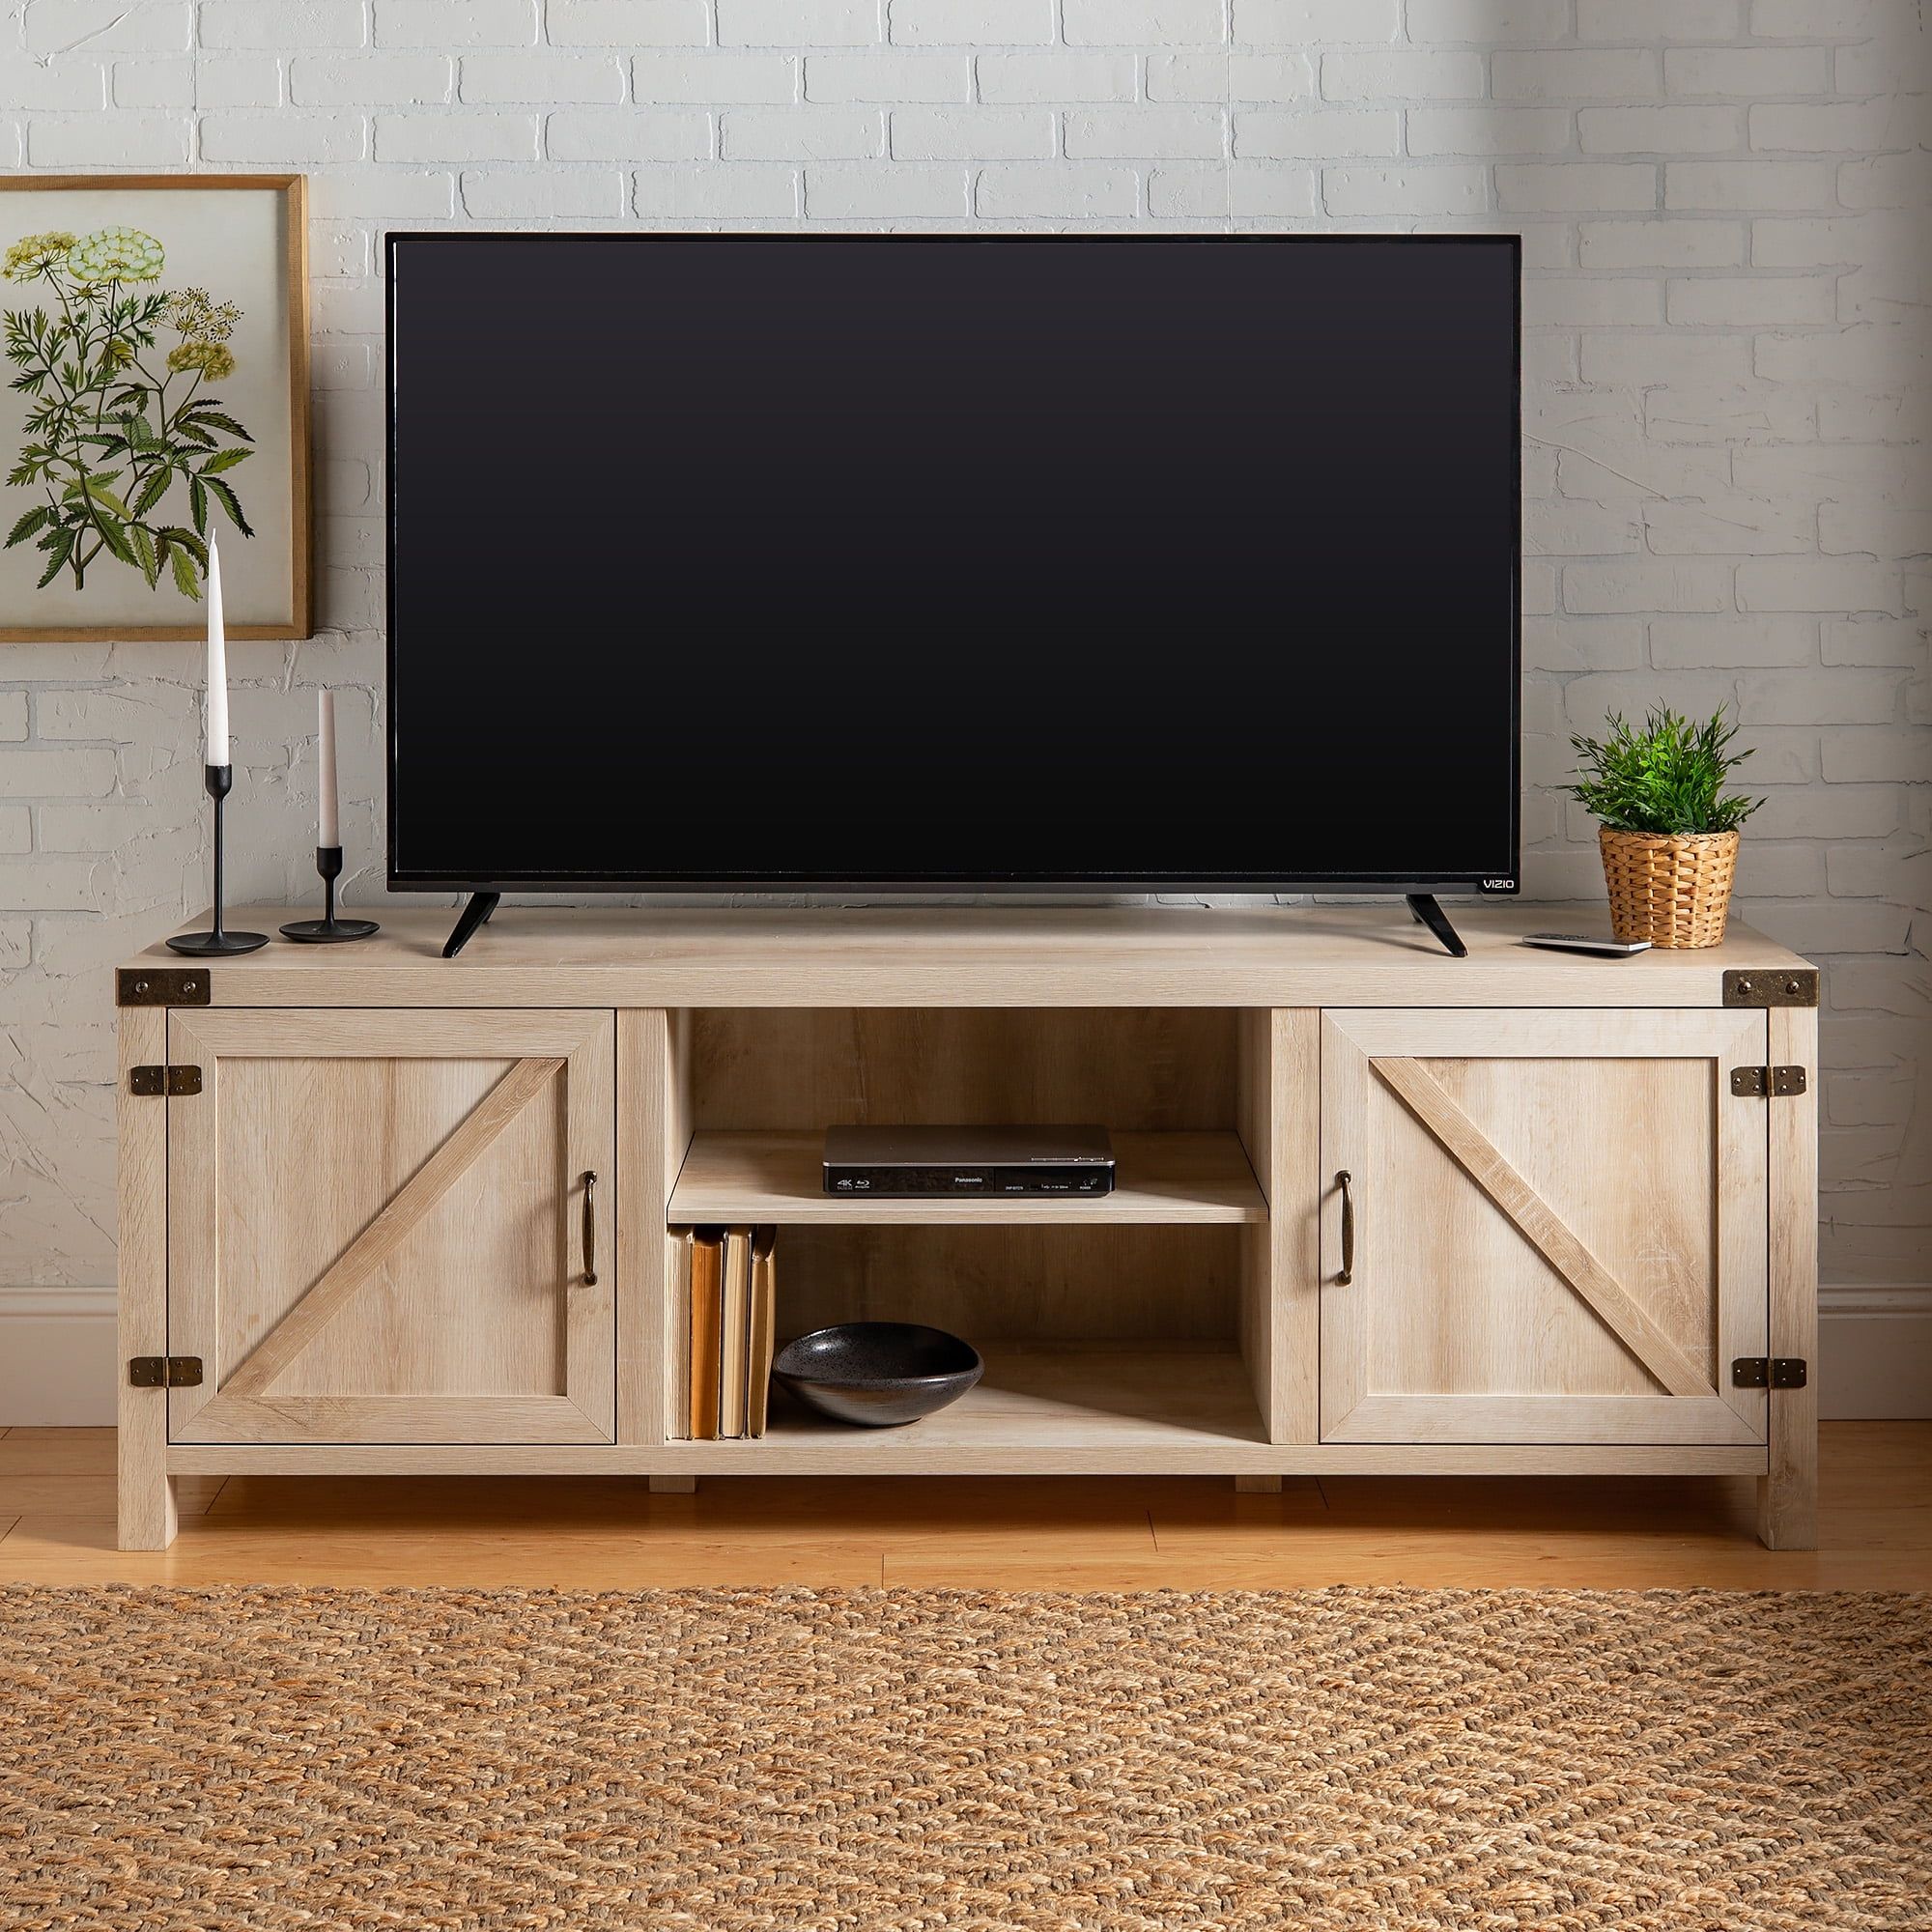 Woven Paths Farmhouse Barn Door Tv Stand For Tvs Up To 80", White Oak In Farmhouse Rattan Tv Stands (View 10 of 20)